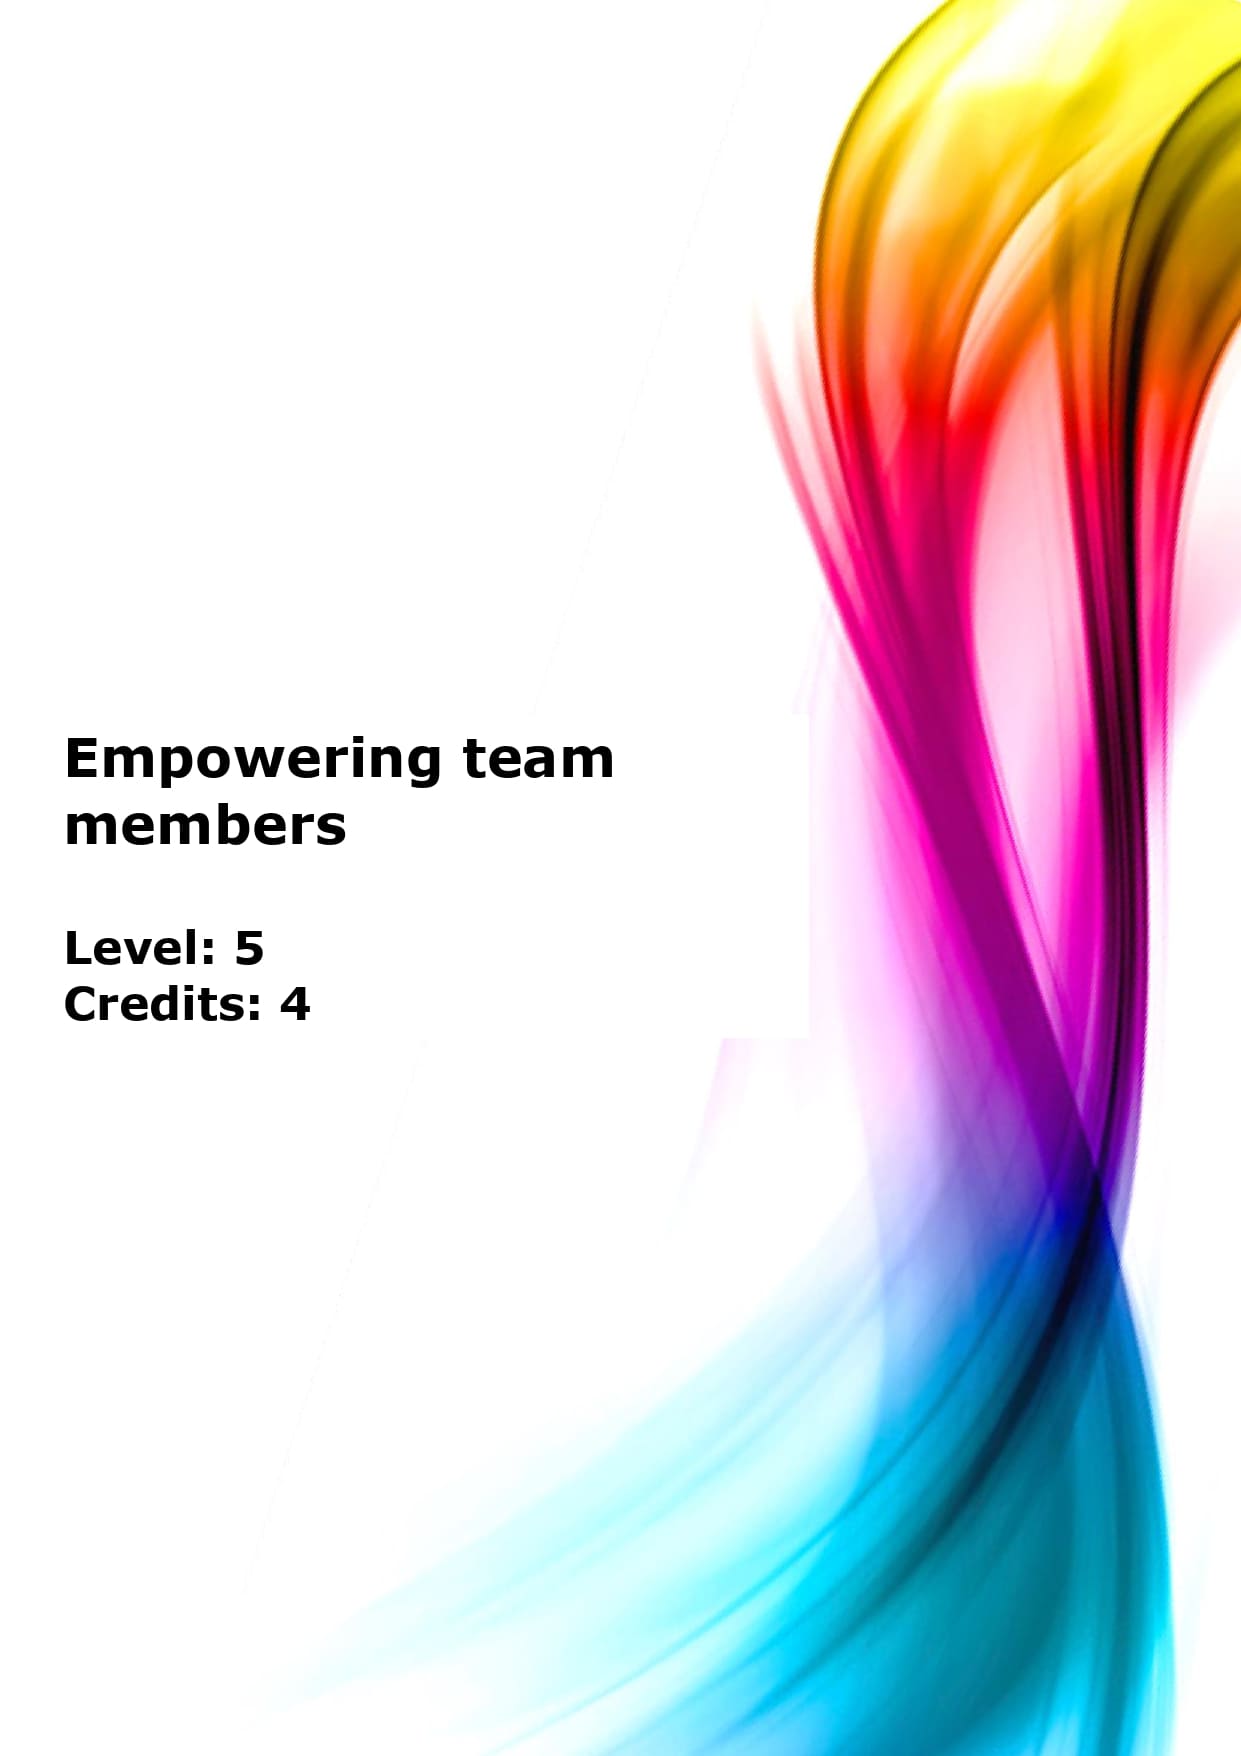 Empower team members through recognising strengths, encouraging participation in decision making and delegating tasks US